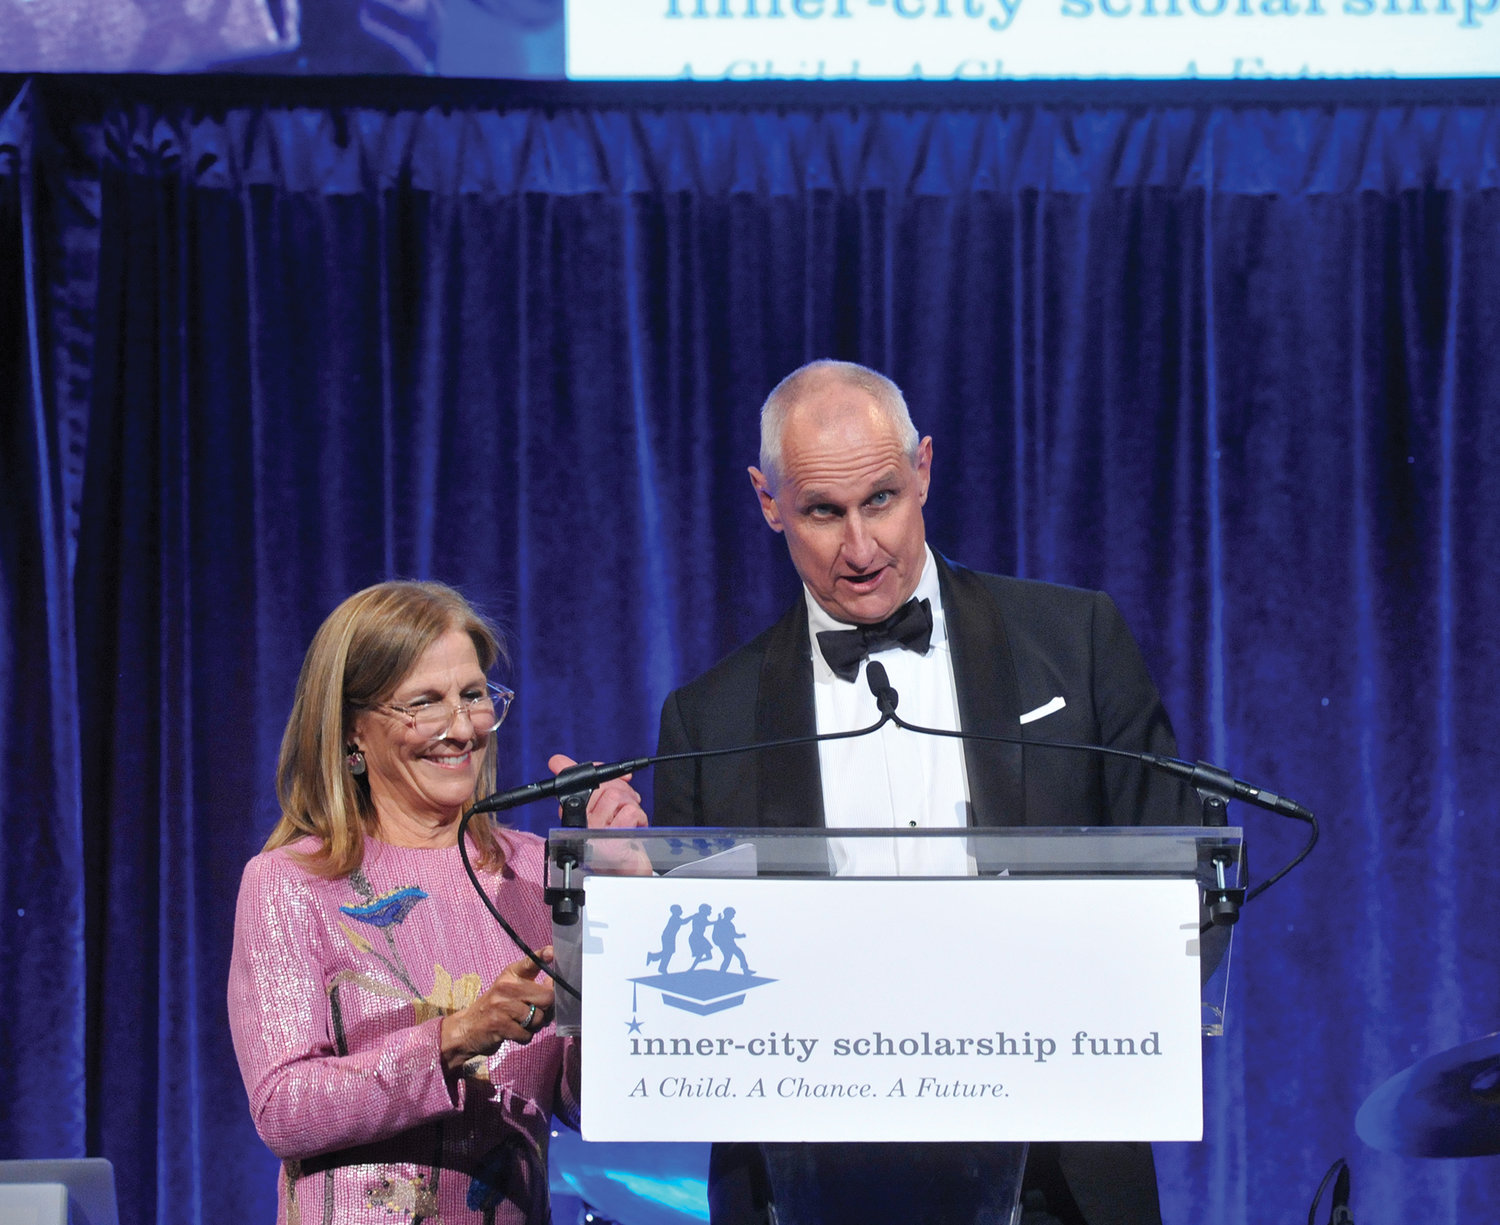 Jon and Mary Rather served as event chairs for the 45th annual Inner-City Scholarship Fund Friends Gala at Cipriani 42nd Street in Manhattan on May 10.